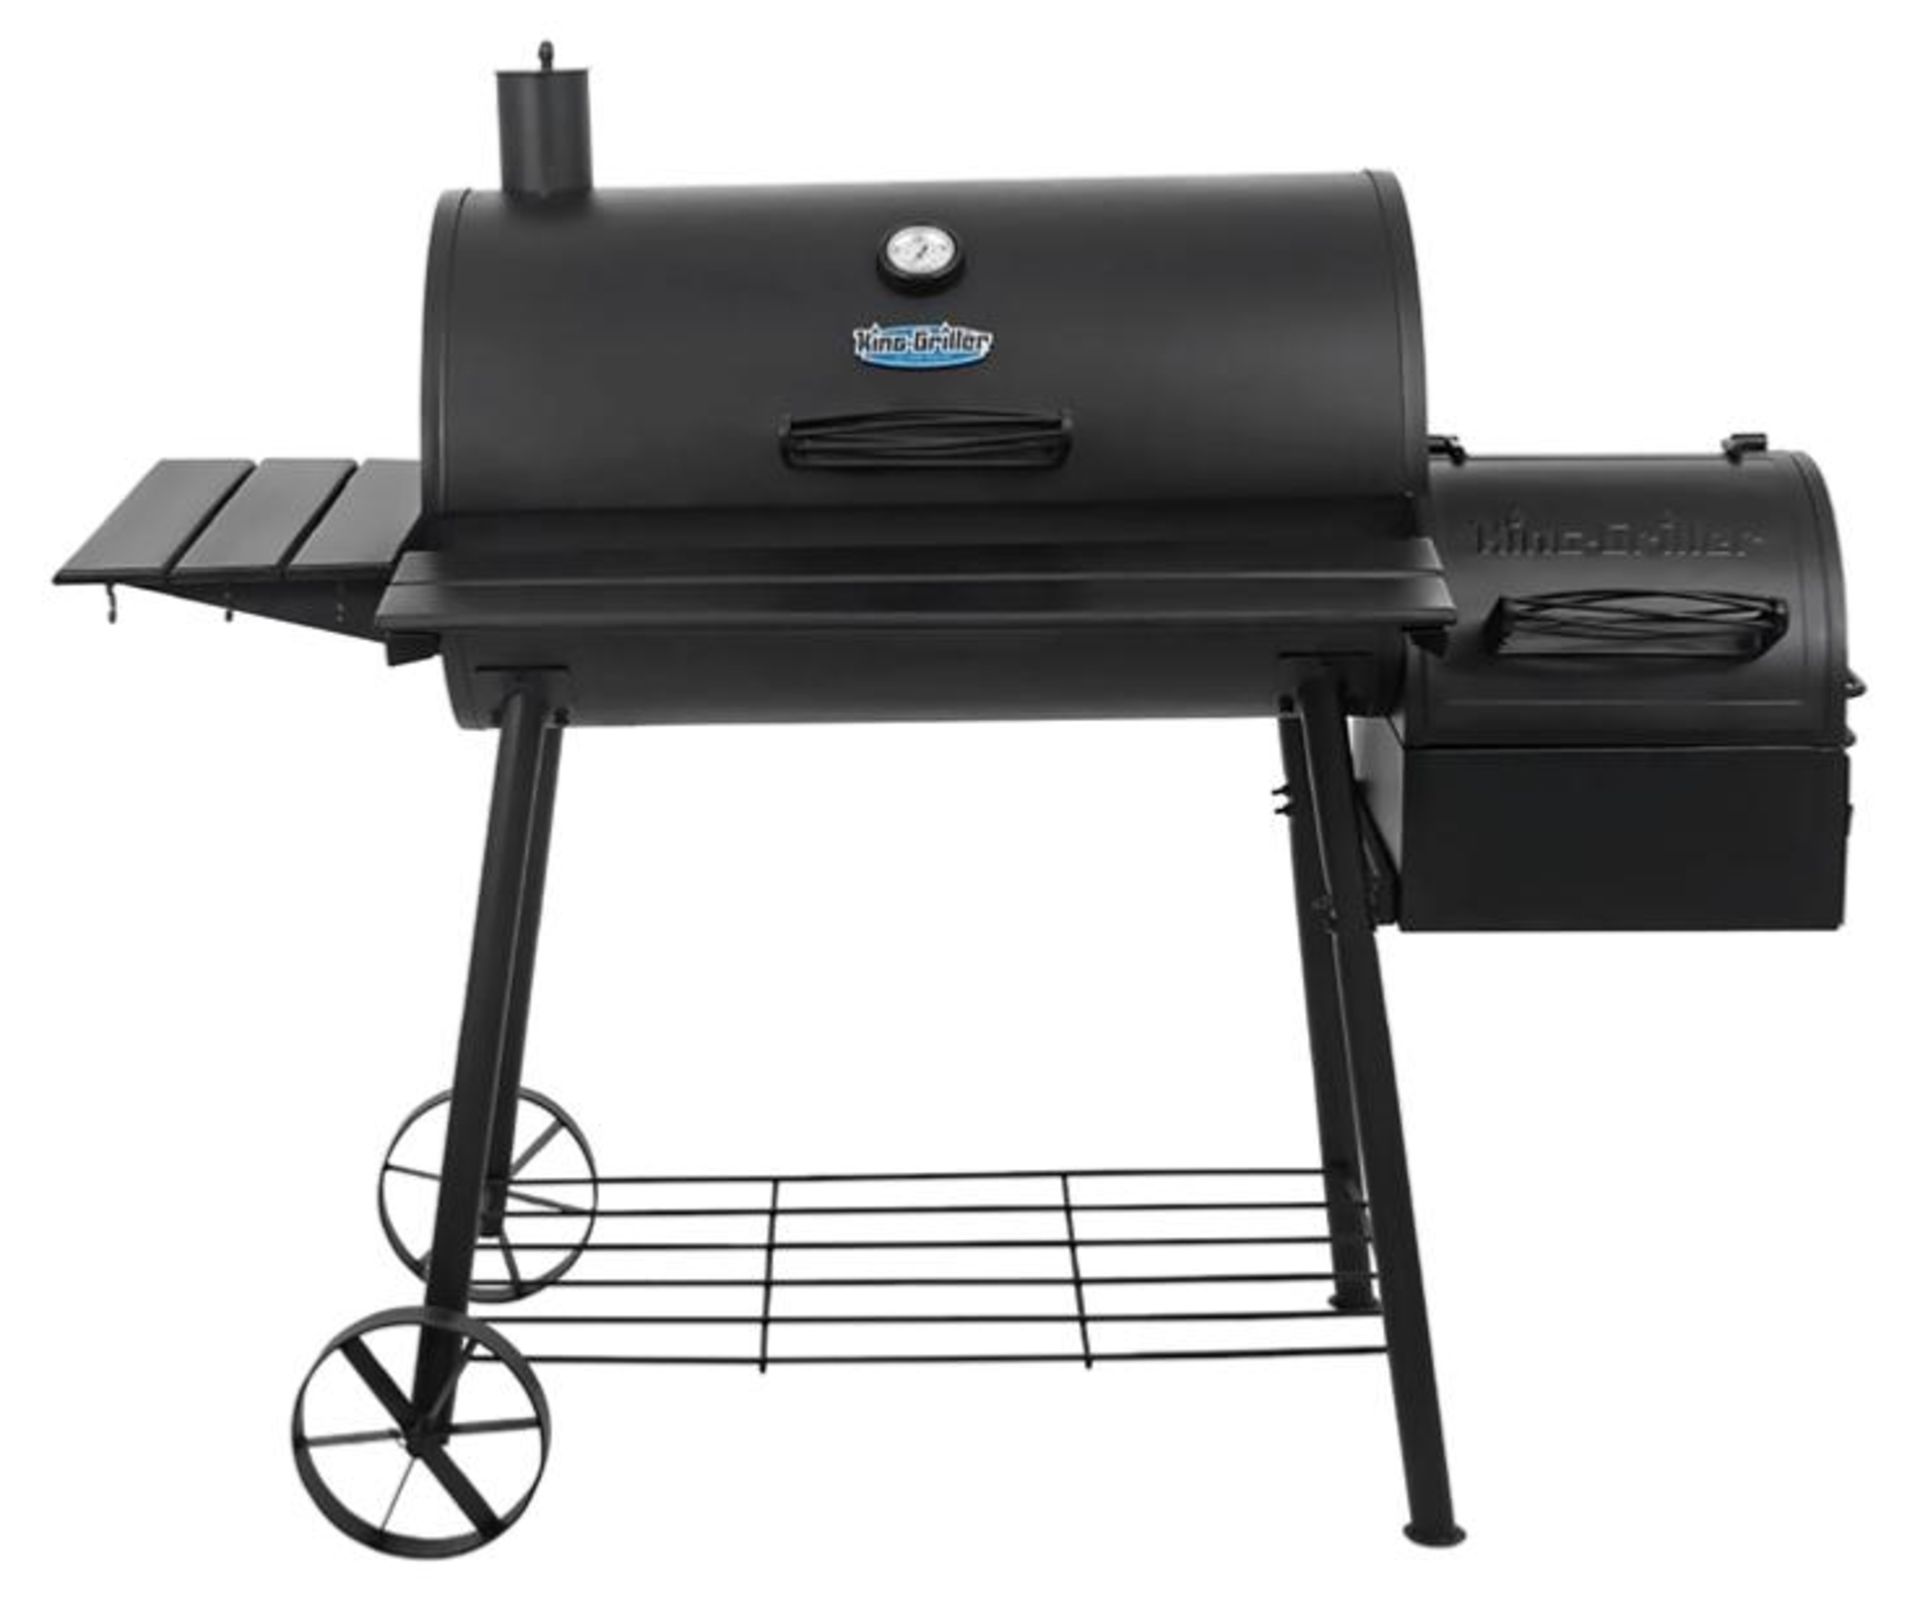 BRAND NEW KING-GRILLER 29 INCH OFF SET SMOKER BY CHAR GRILLER